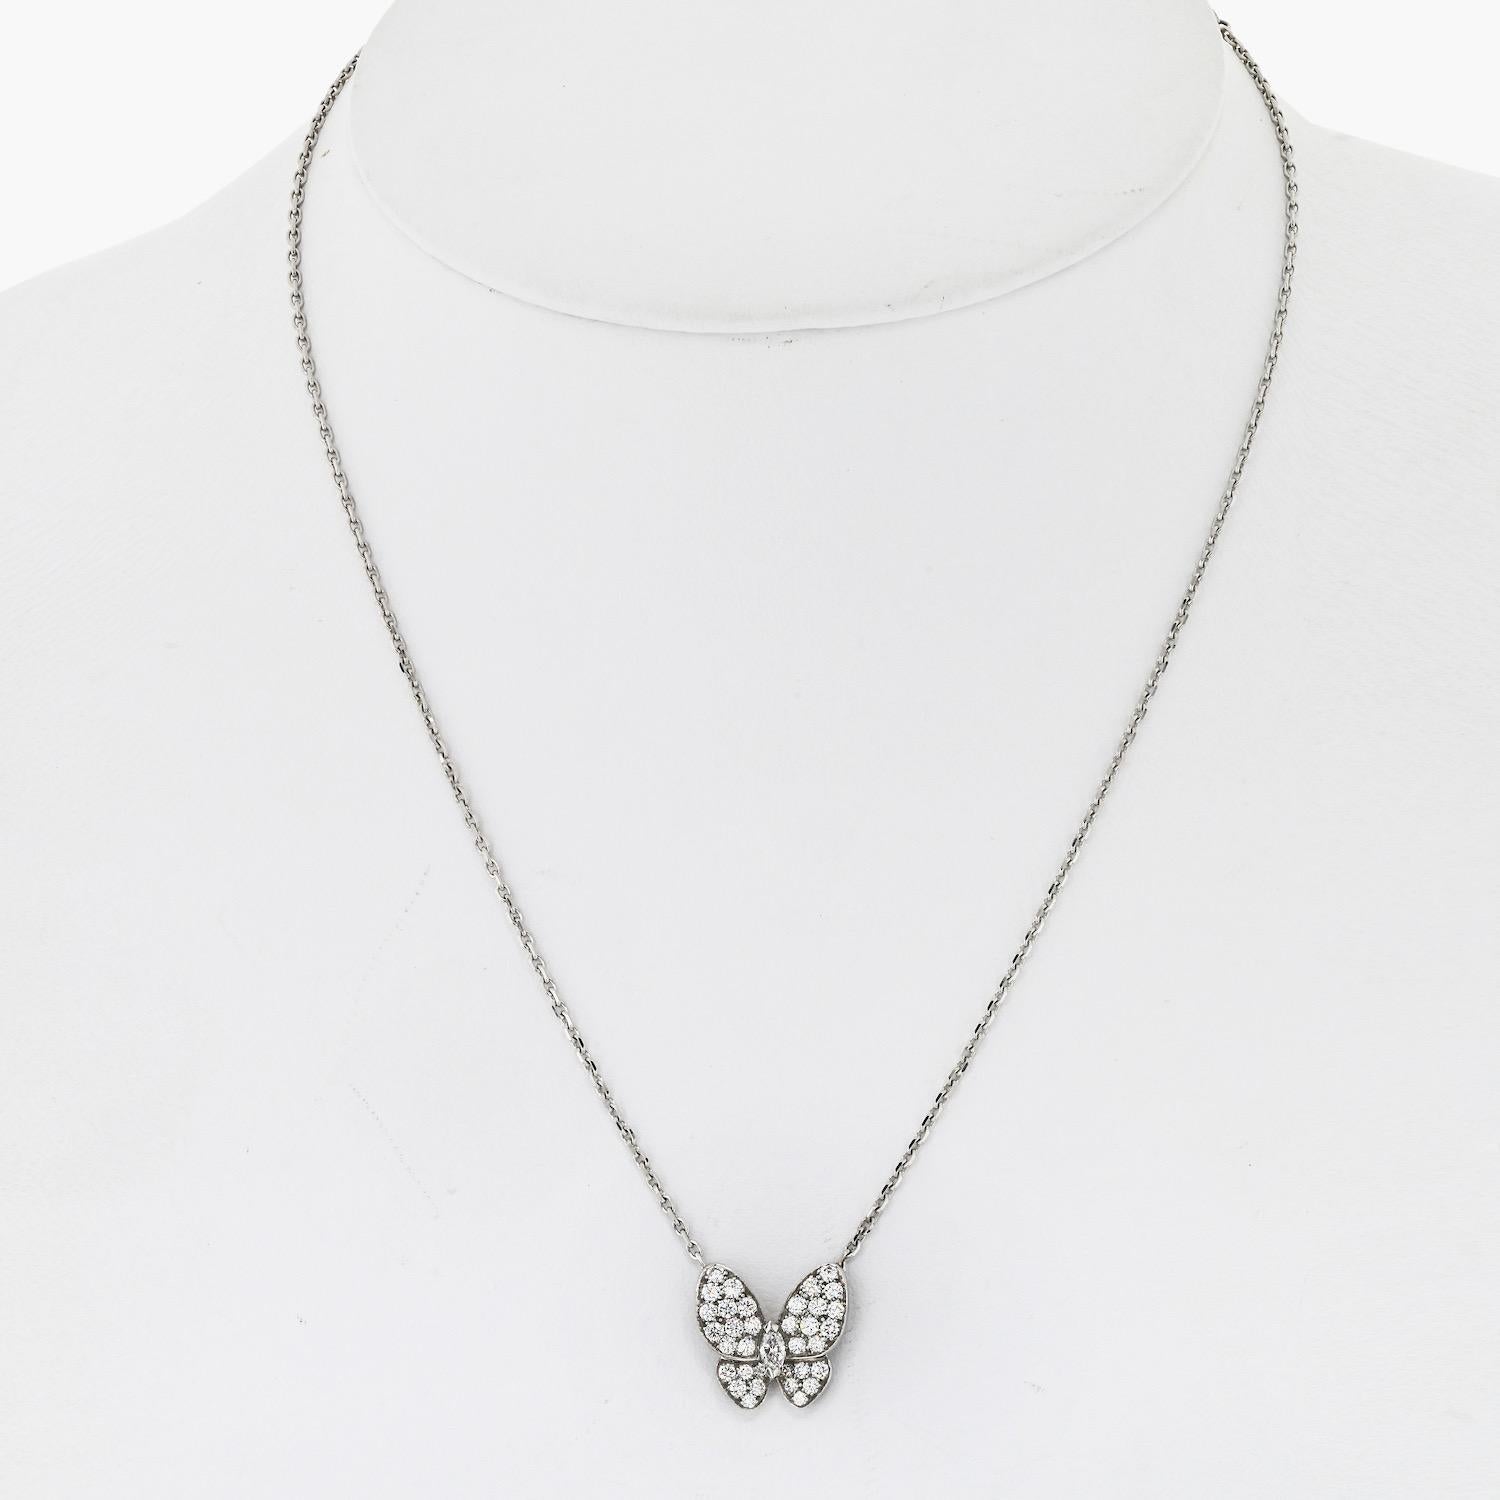 Van Cleef & Arpels Diamond Butterfly Papillon White Gold Necklace. Crafted from luxurious 18k white gold, this exquisite necklace features a captivating diamond butterfly papillon pendant that exudes elegance and sophistication.

Adorned with 35